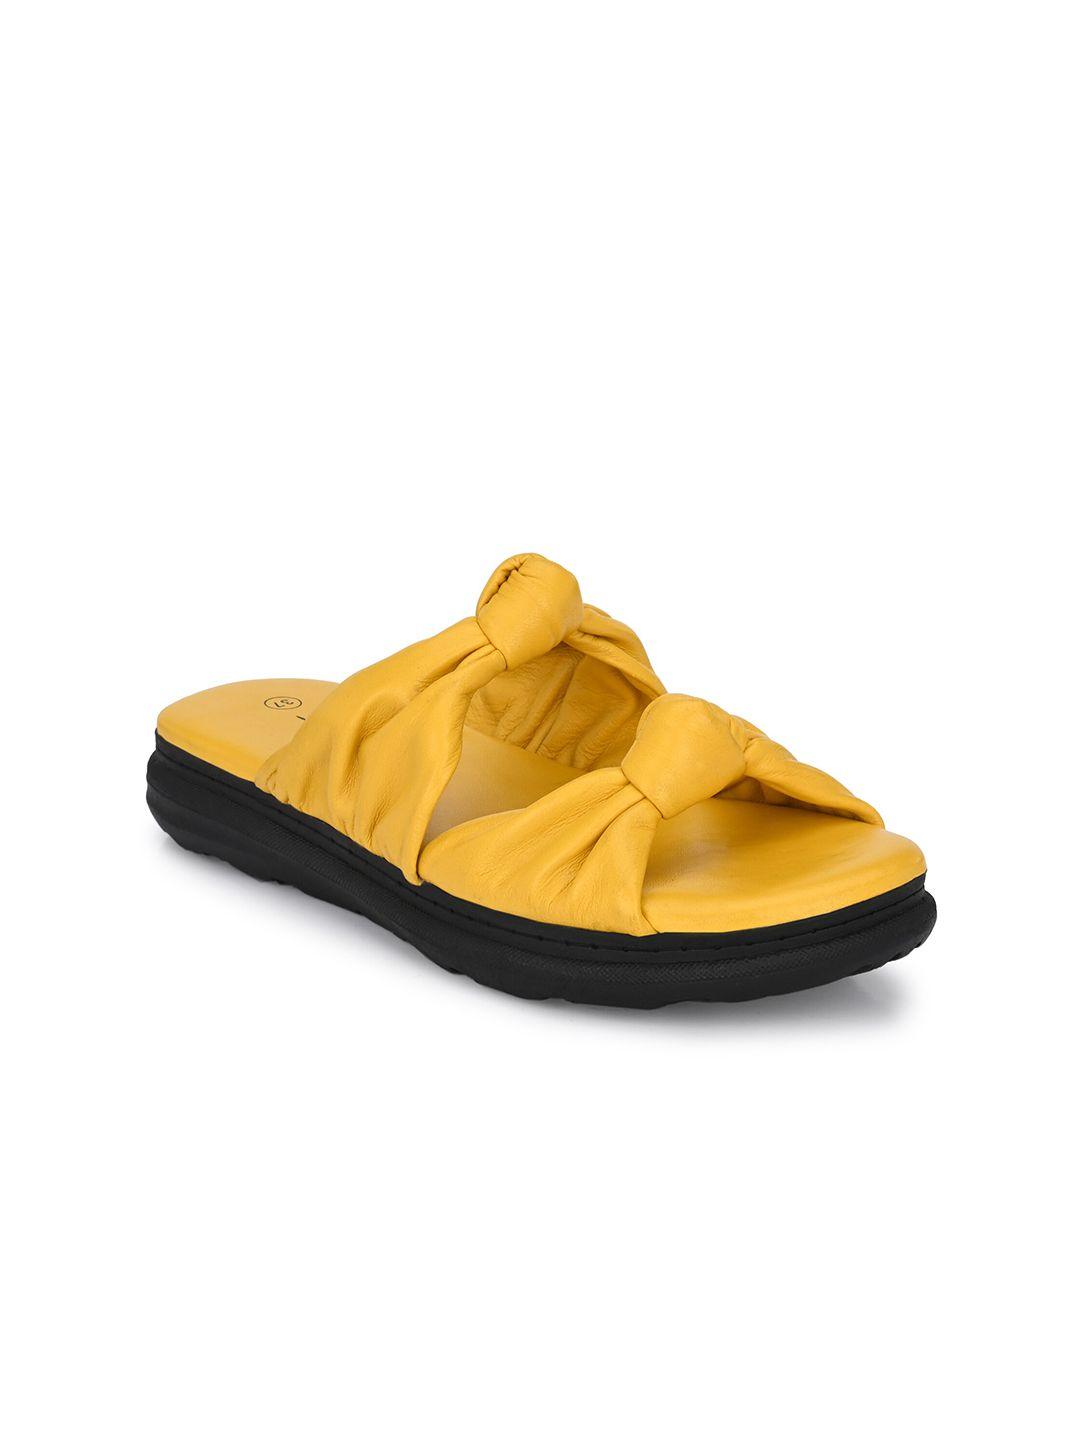 delize women yellow open toe flats with bows